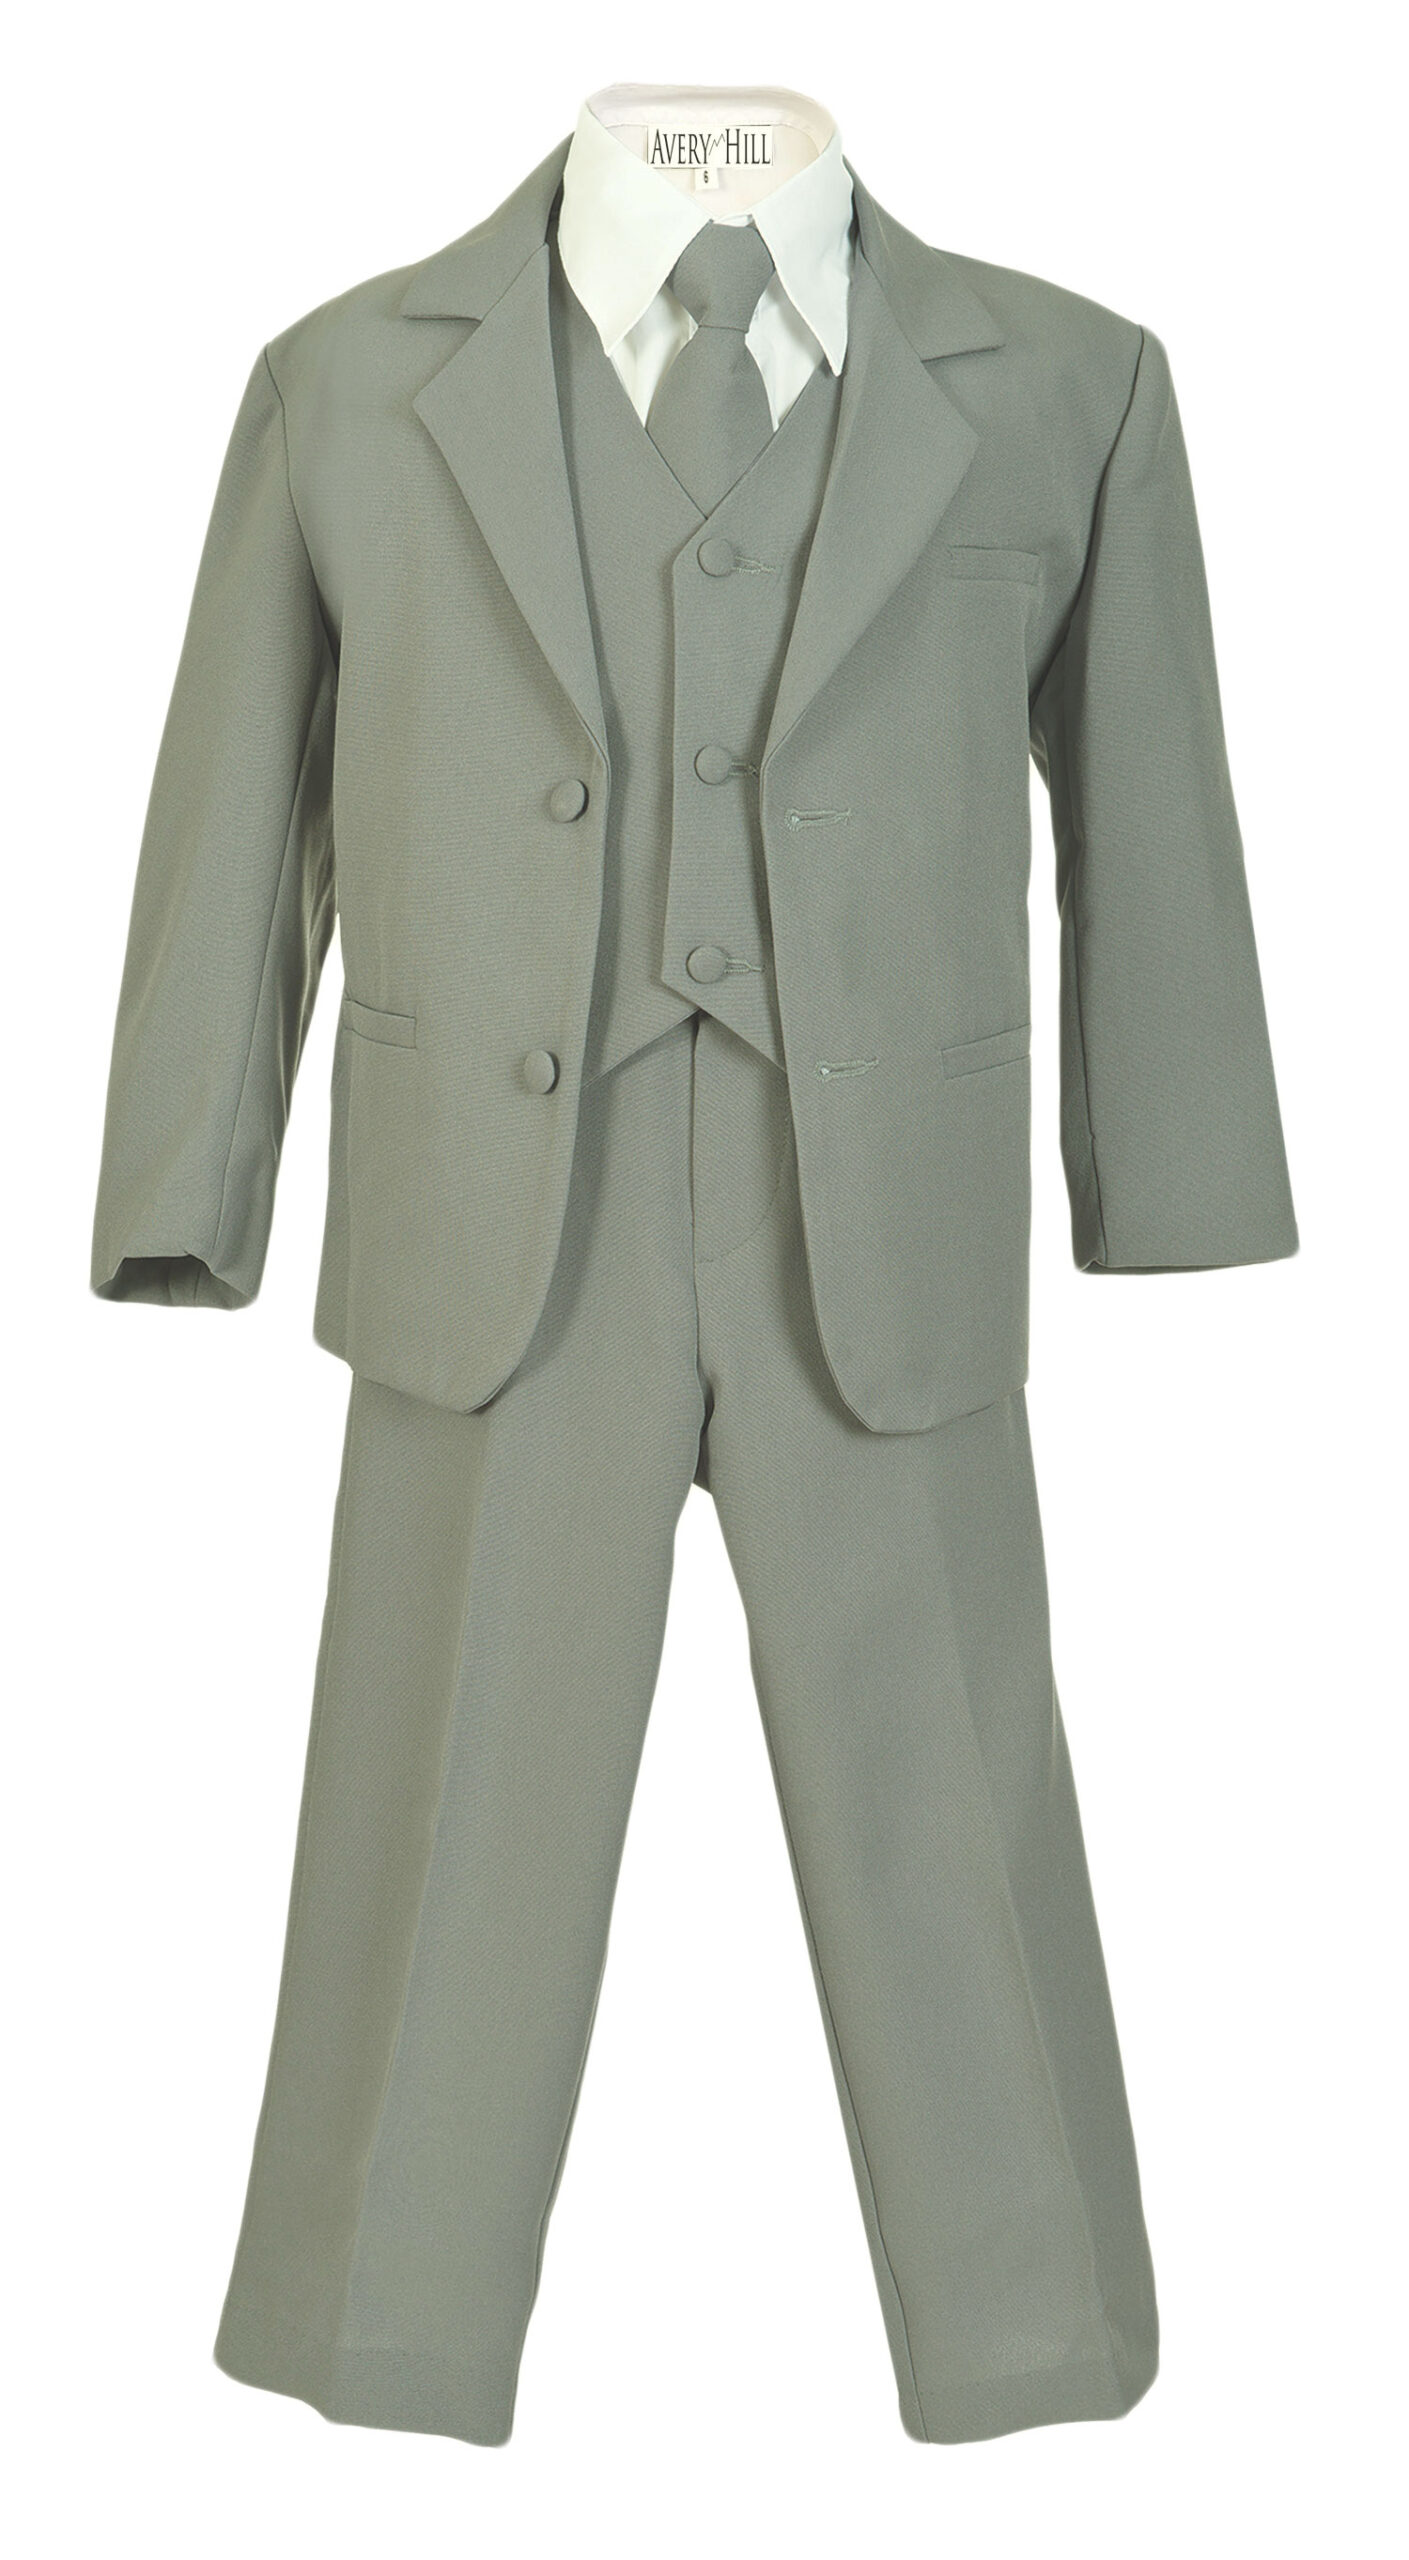 Avery Hill Boys Formal 5 Piece Suit with Shirt and Vest Silver White - 12